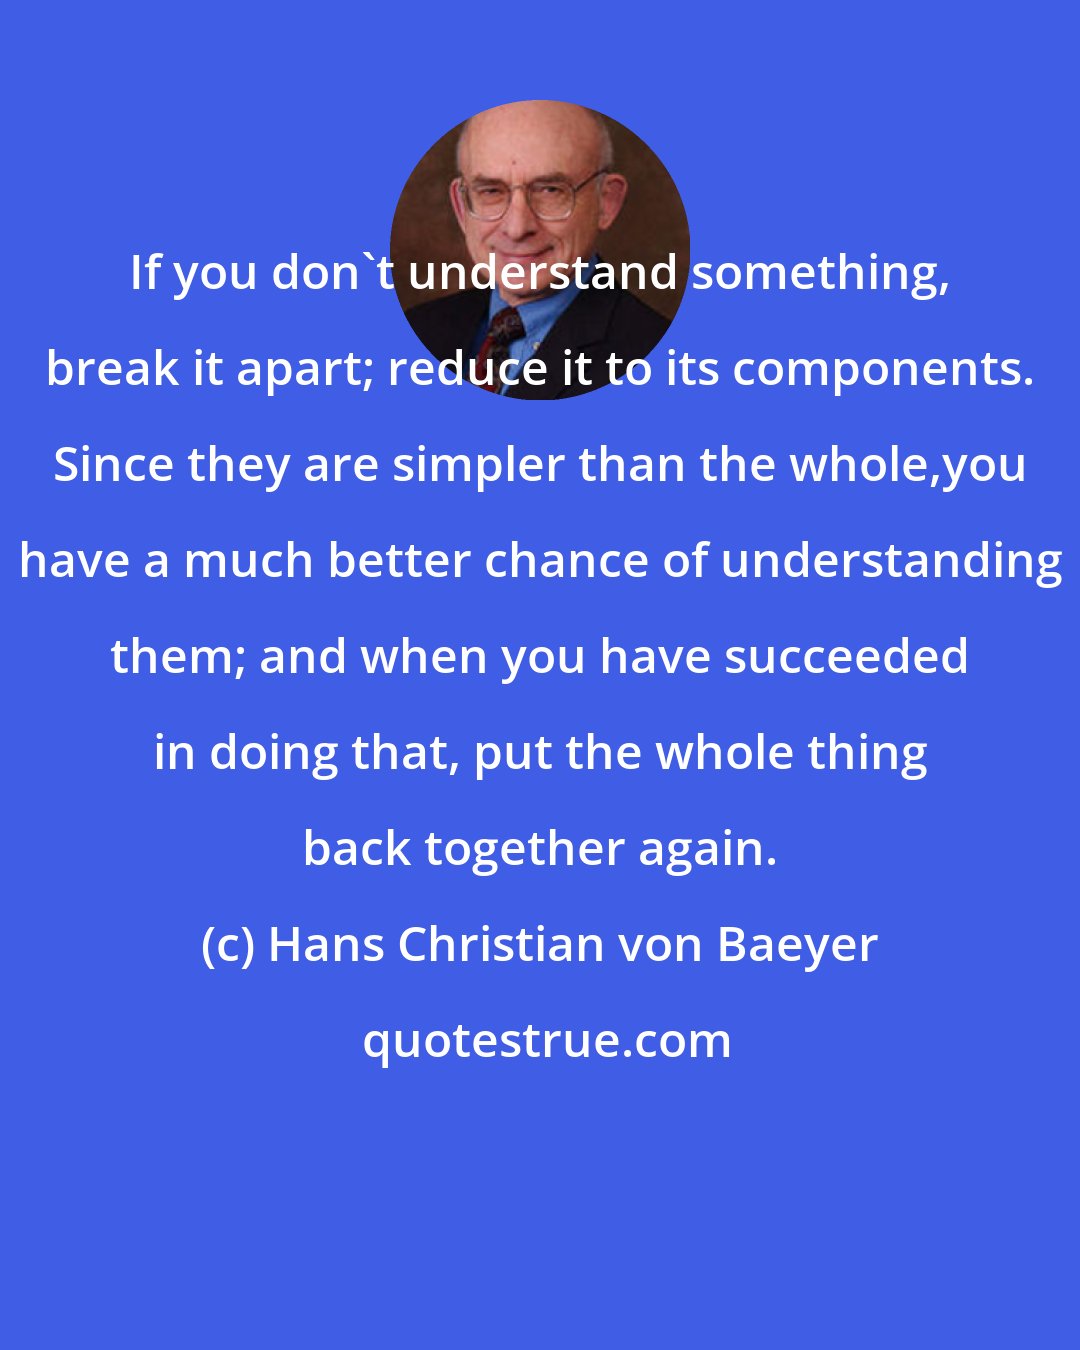 Hans Christian von Baeyer: If you don't understand something, break it apart; reduce it to its components. Since they are simpler than the whole,you have a much better chance of understanding them; and when you have succeeded in doing that, put the whole thing back together again.